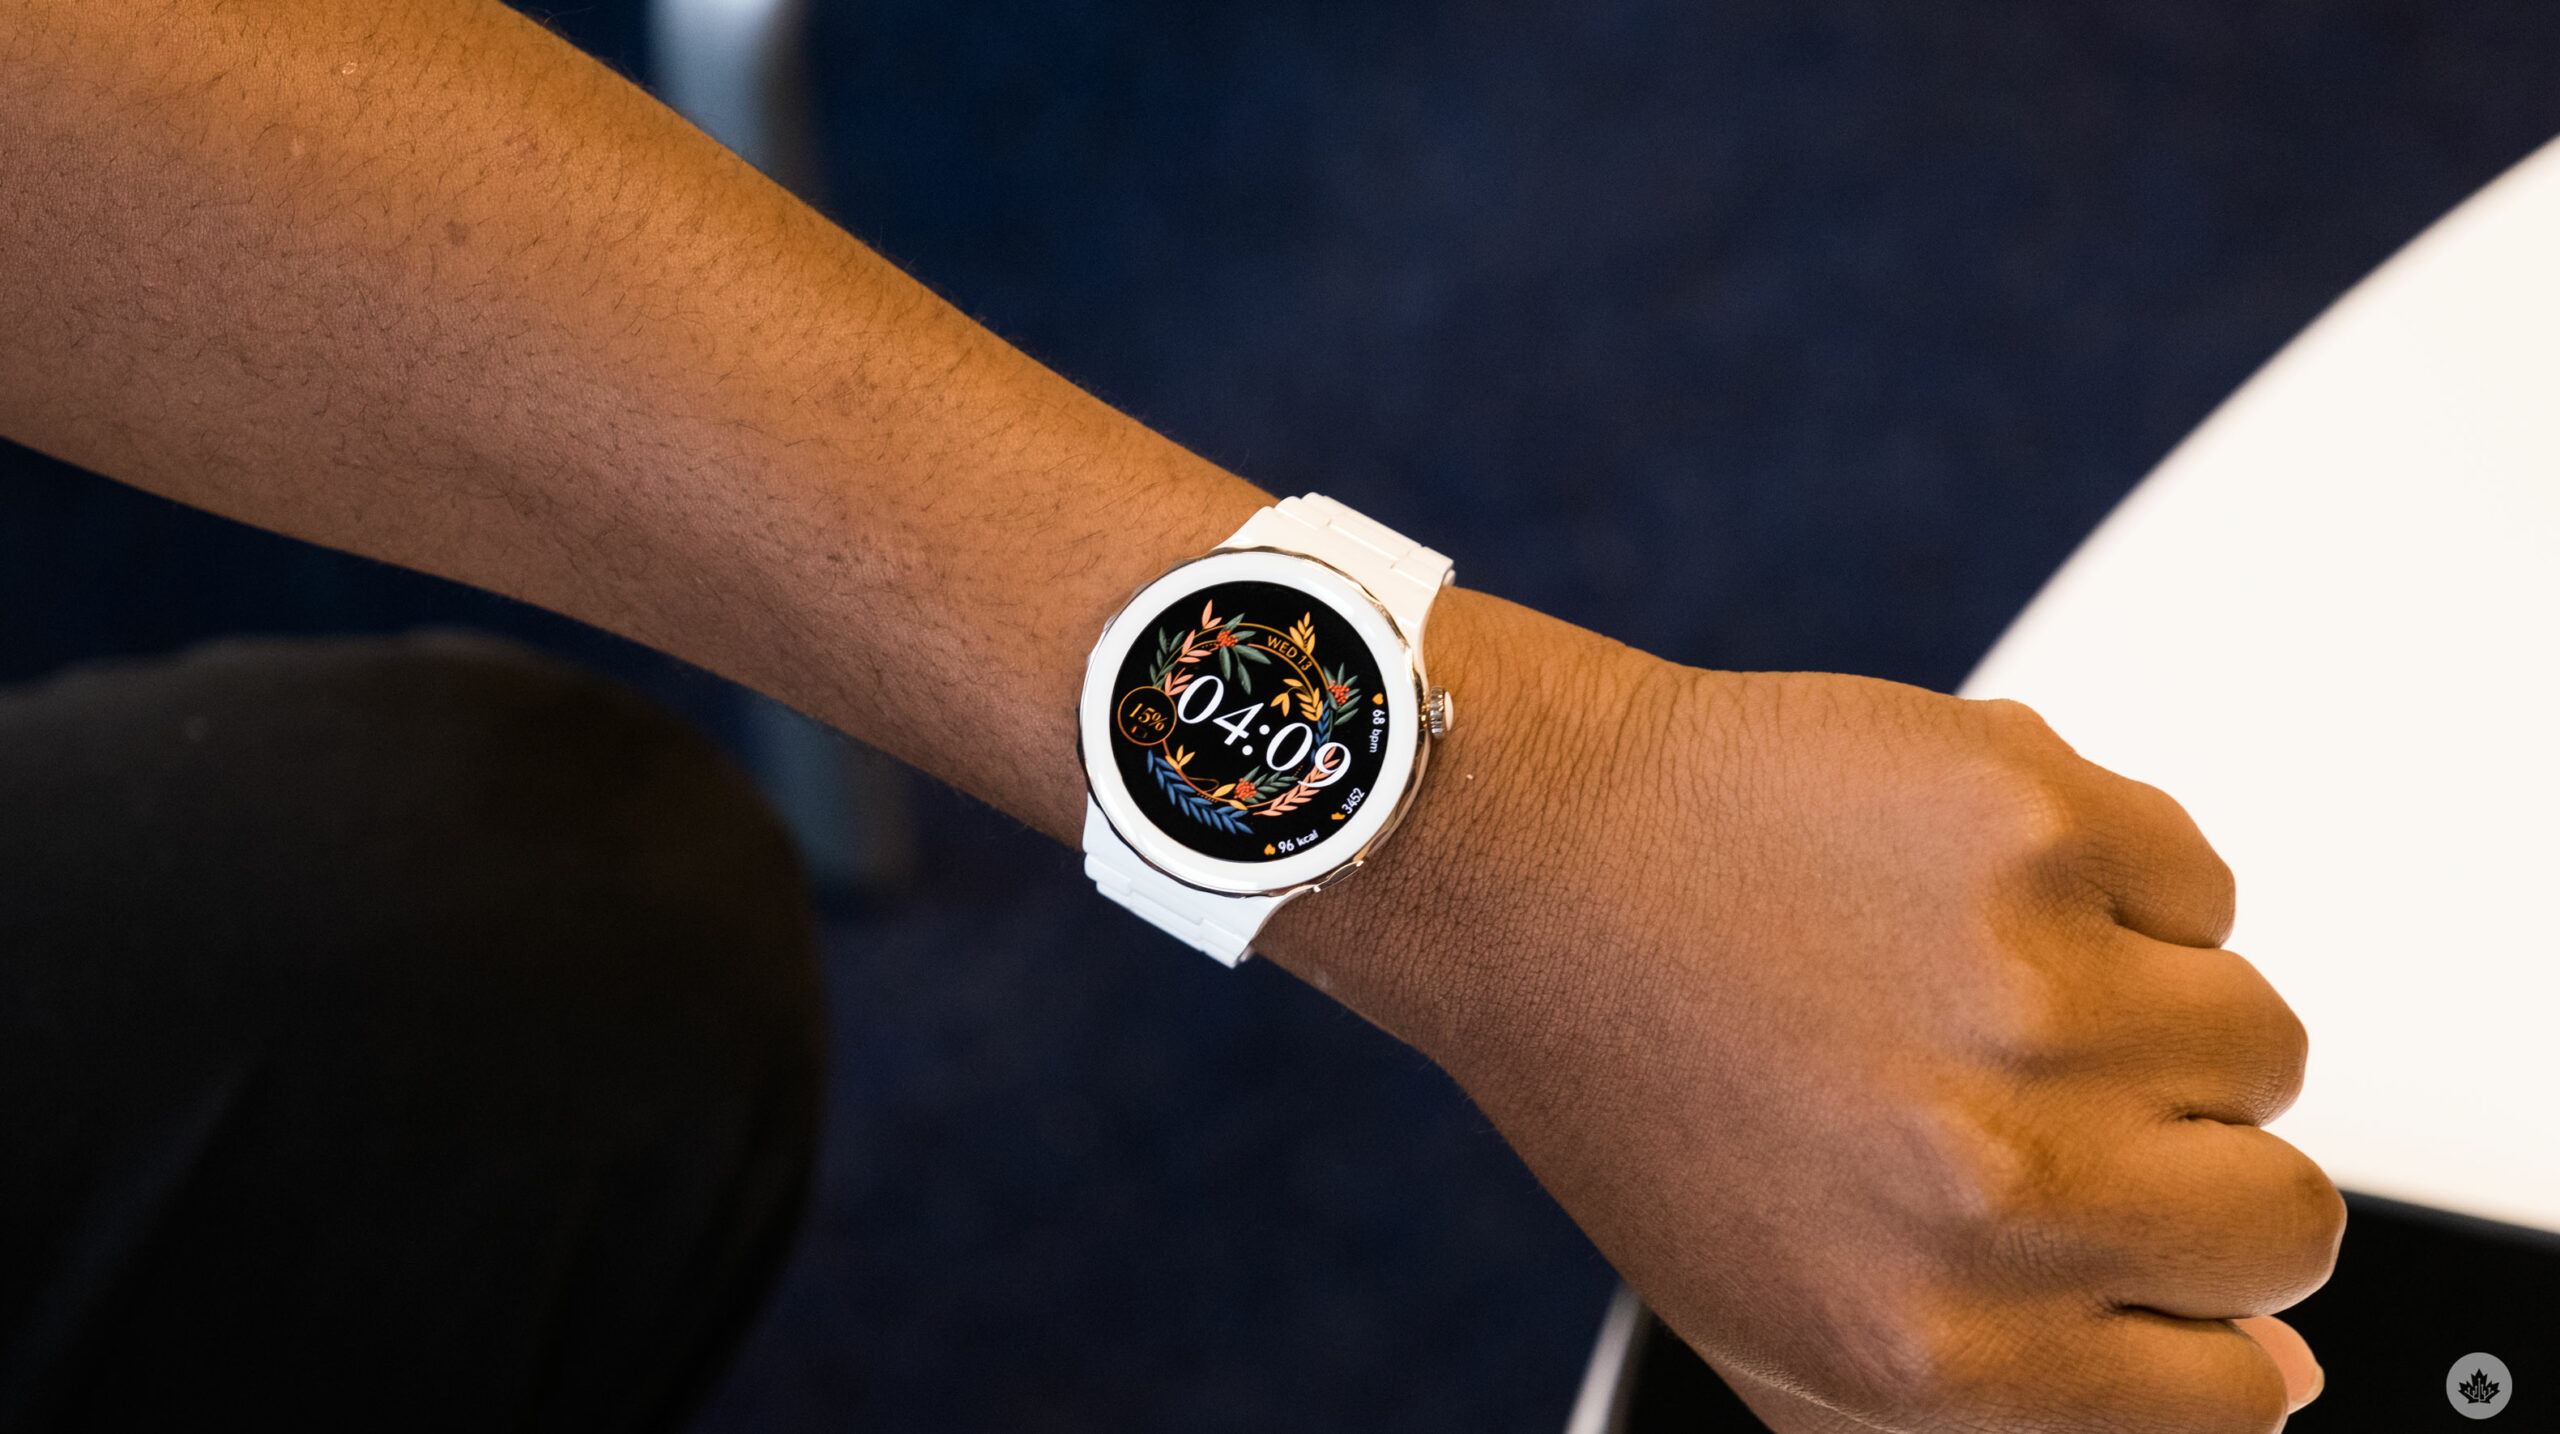 Huawei's Watch GT 3 Pro brings a new level of style and battery life